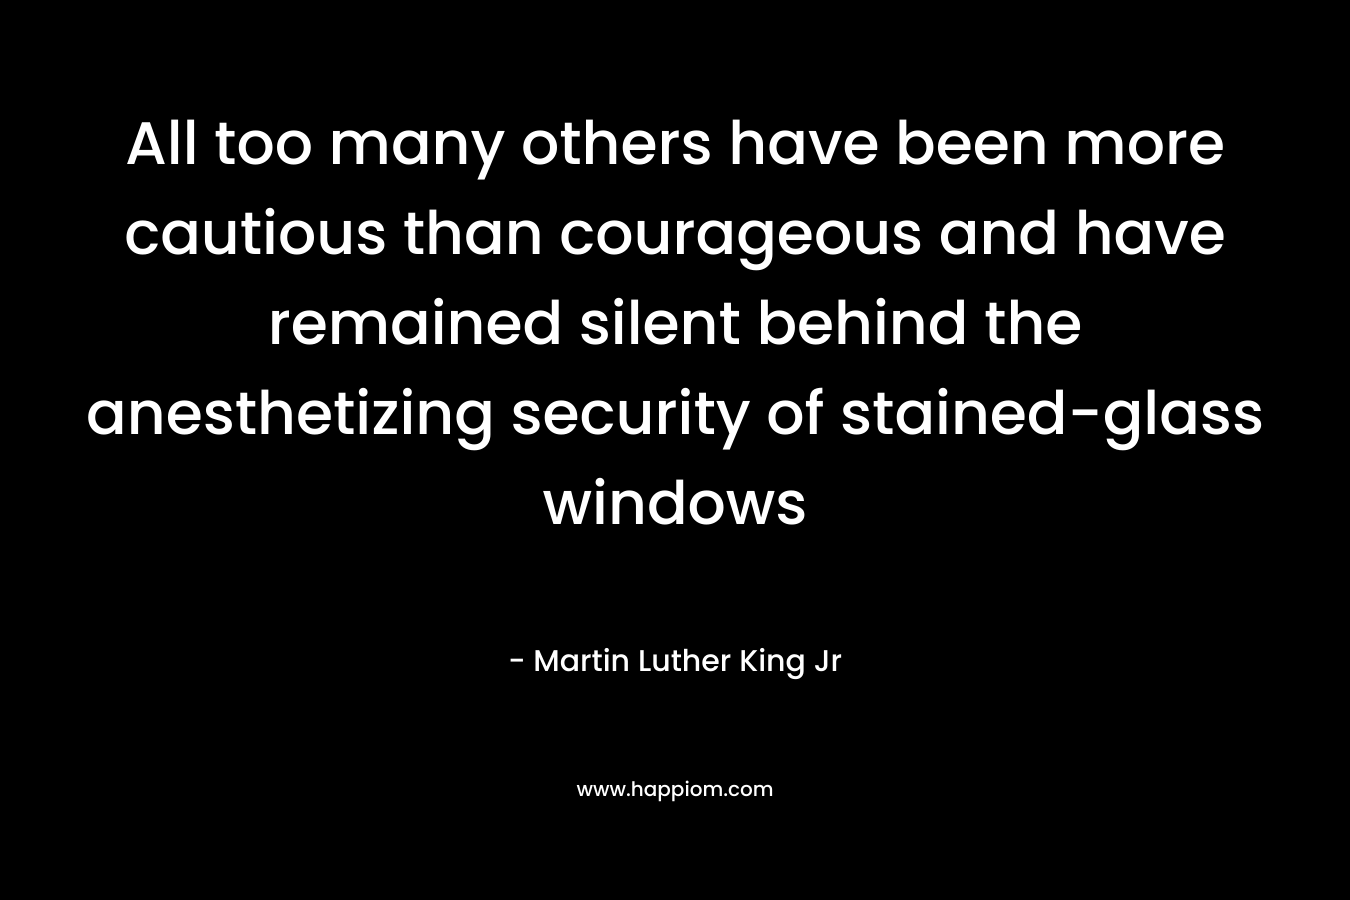 All too many others have been more cautious than courageous and have remained silent behind the anesthetizing security of stained-glass windows